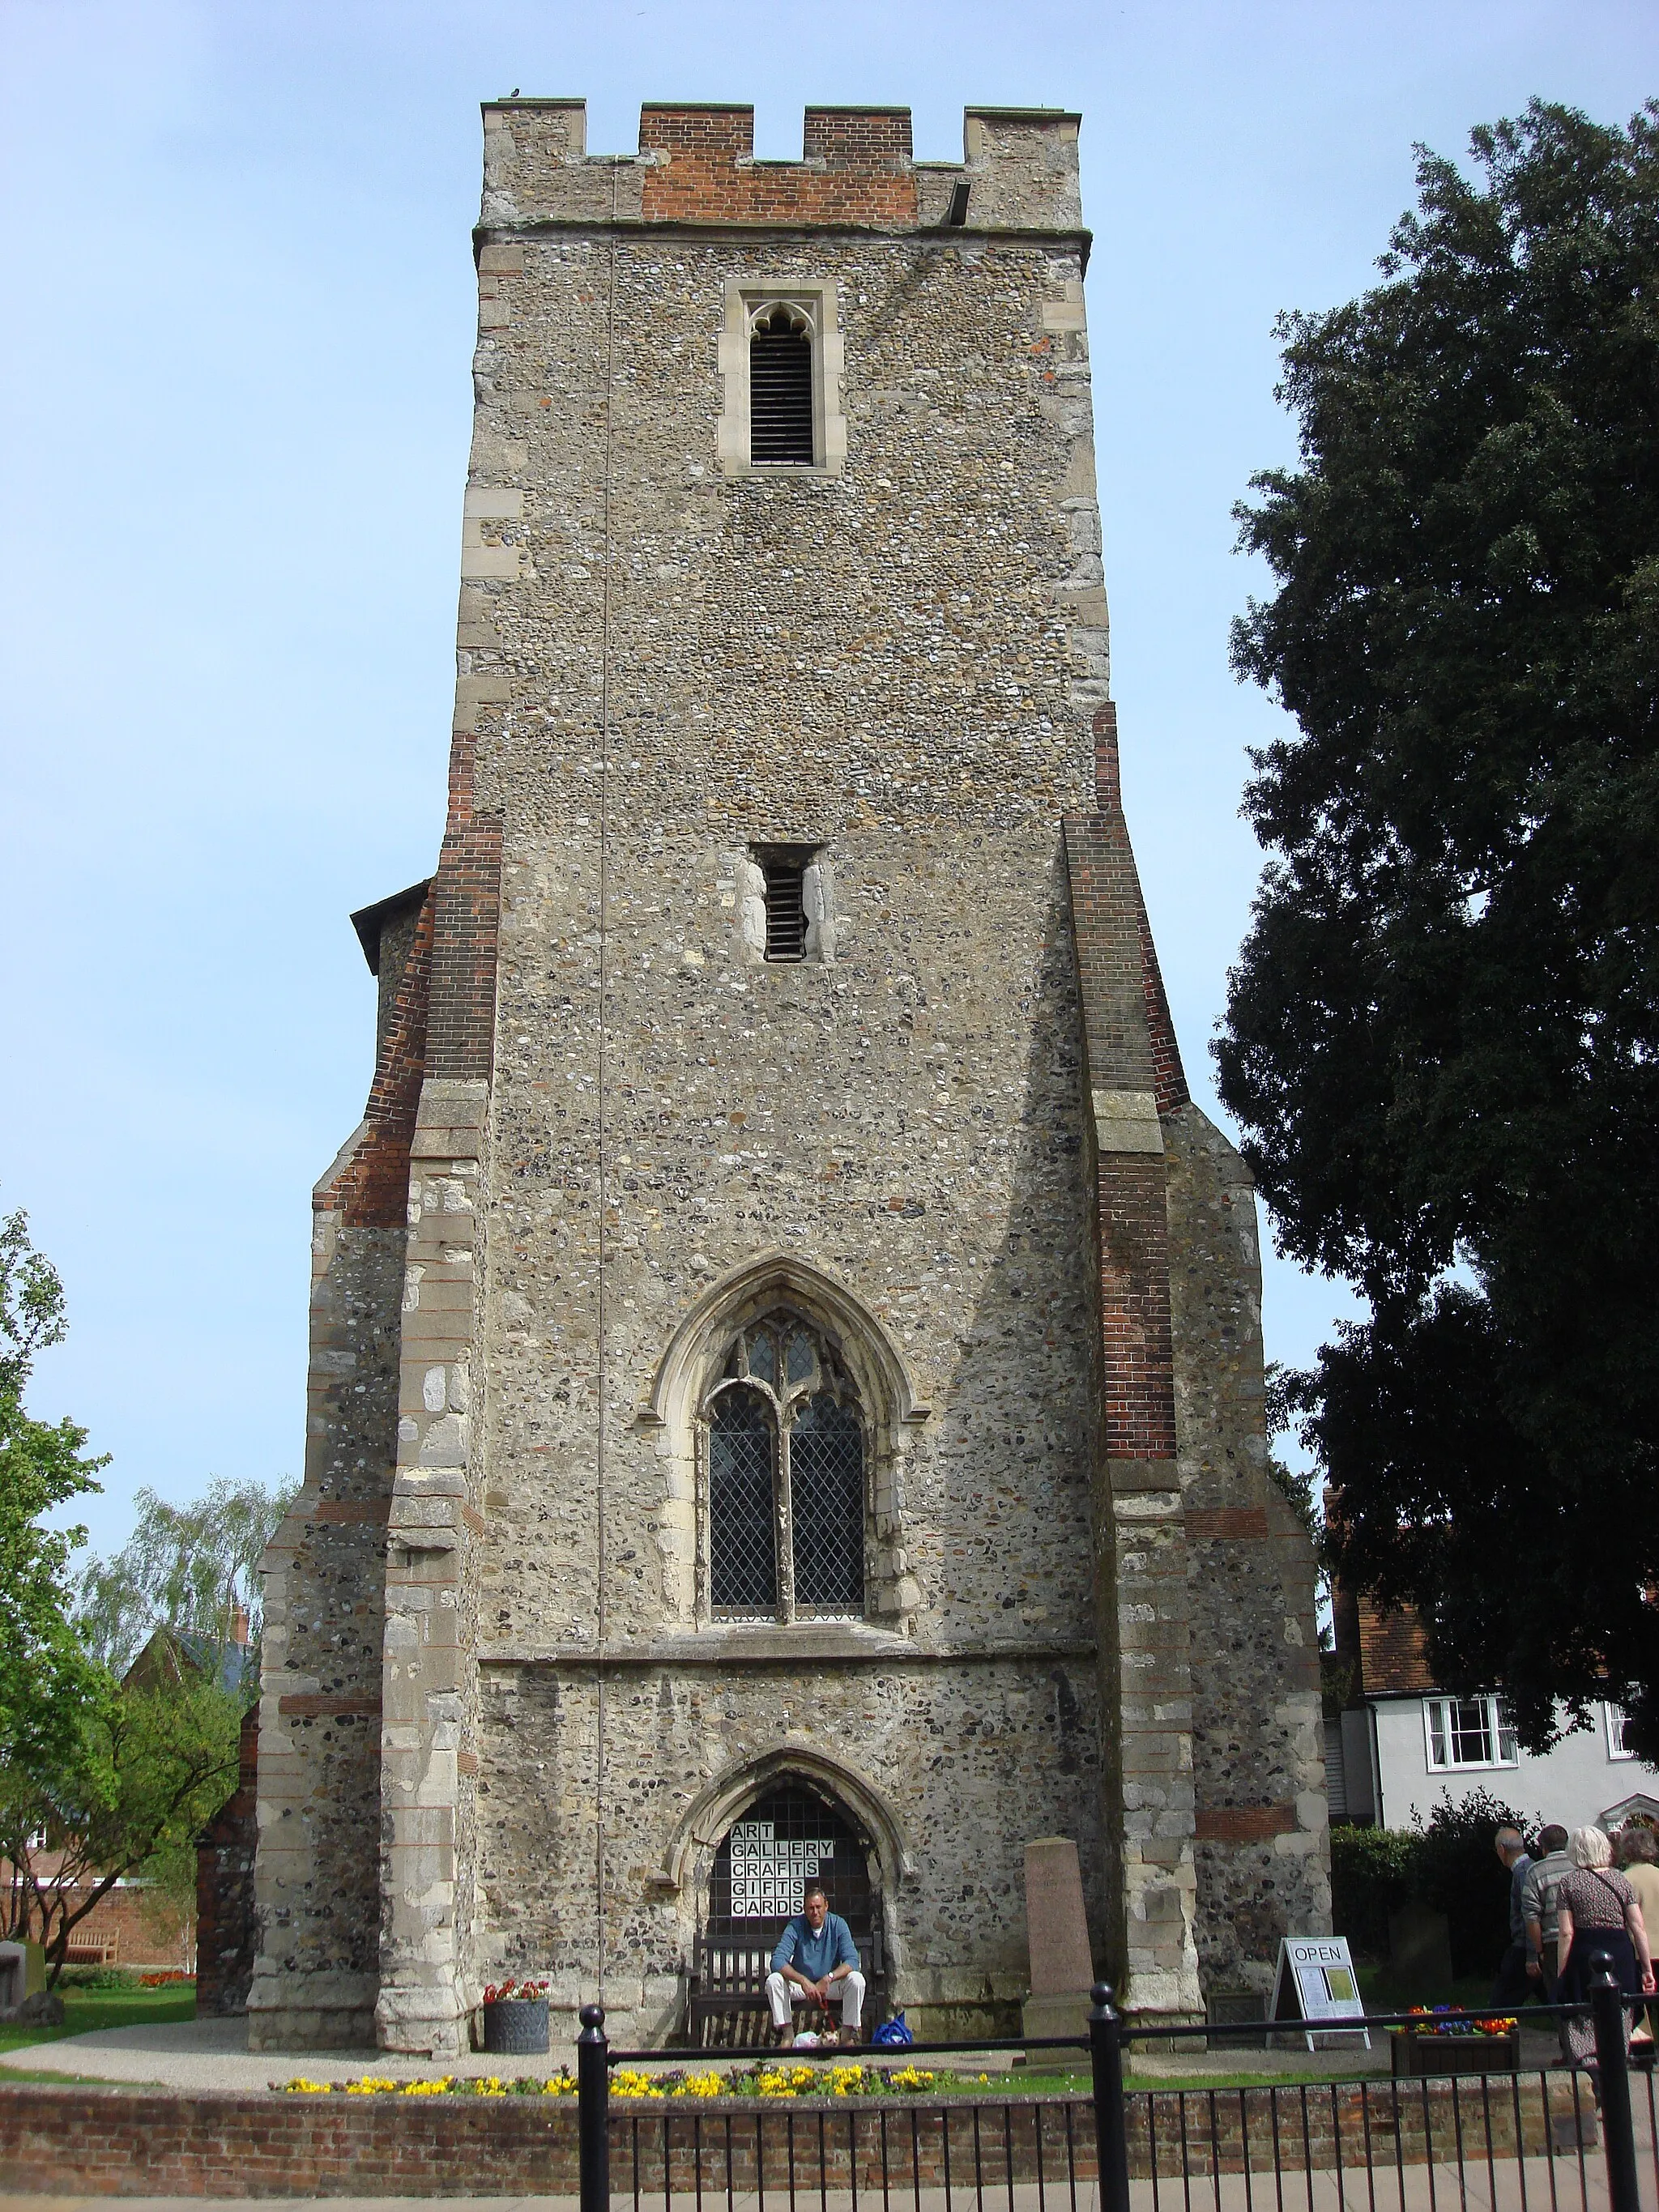 Photo showing: Tower, St. Peter's Church, Maldon. In the seventeenth century Thomas Plume started the Plume Library to house over 7,000 books printed between 1470 and his death in 1704; the collection has been added to at various times since 1704. The Plume Library is to be found at St. Peter's Church. Only the original Tower survives, the rest of the building having been rebuilt by Thomas Plume to house his library (on the first floor) and Maldon Grammar School (on the ground floor)